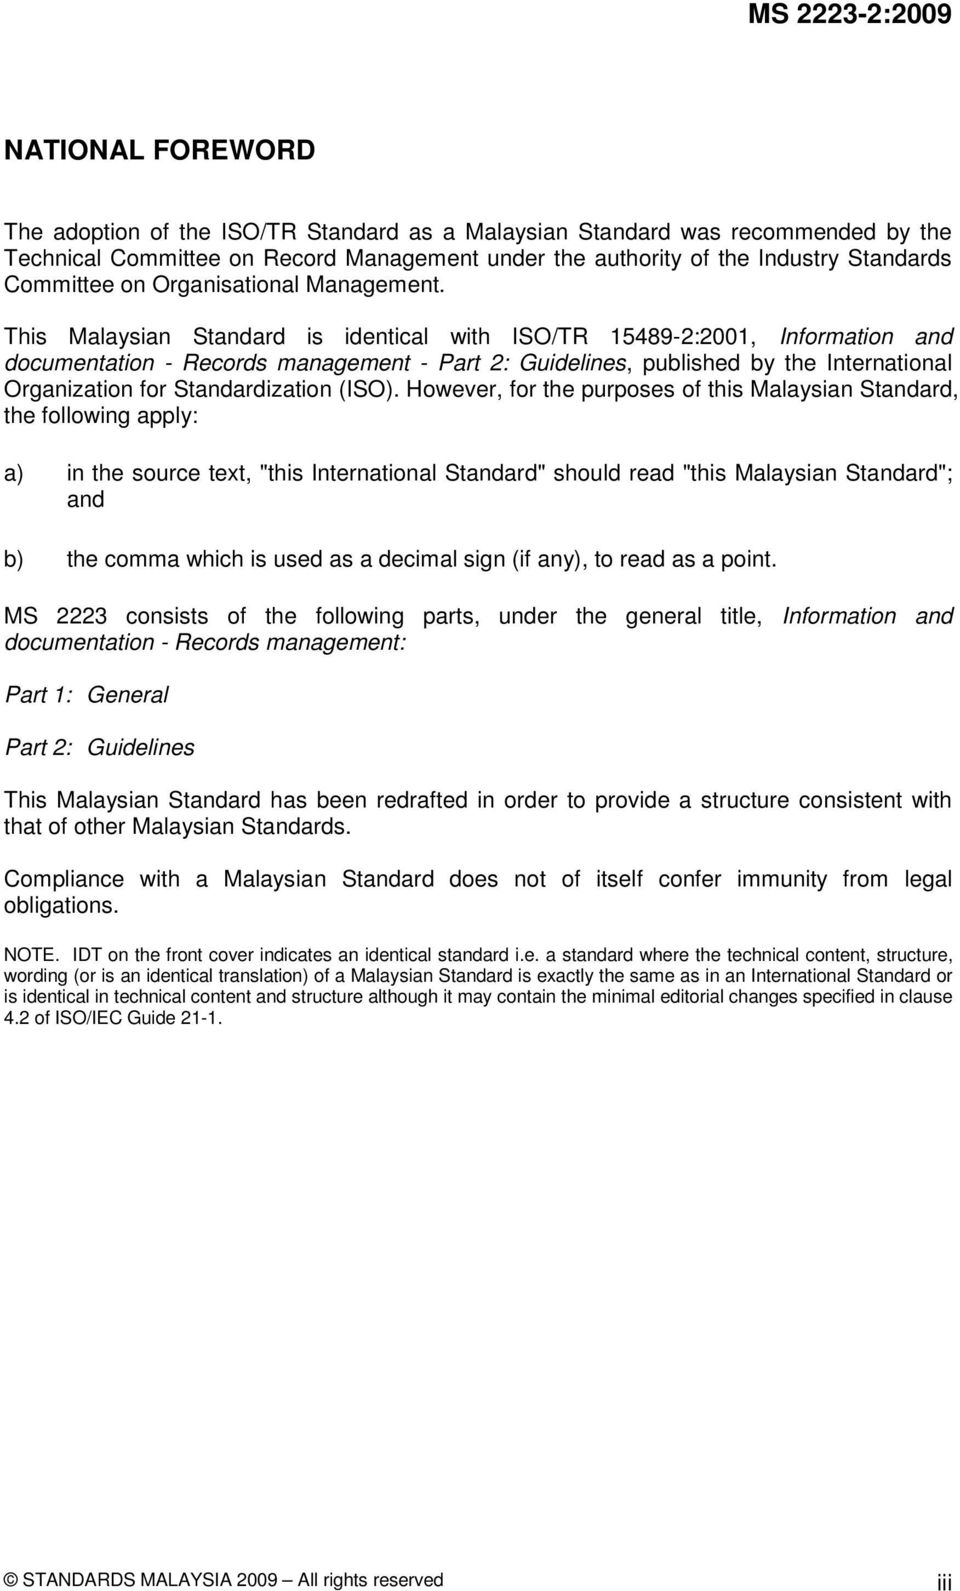 This Malaysian Standard is identical with ISO/TR 15489-2:2001, Information and documentation - Records management - Part 2: Guidelines, published by the International Organization for Standardization